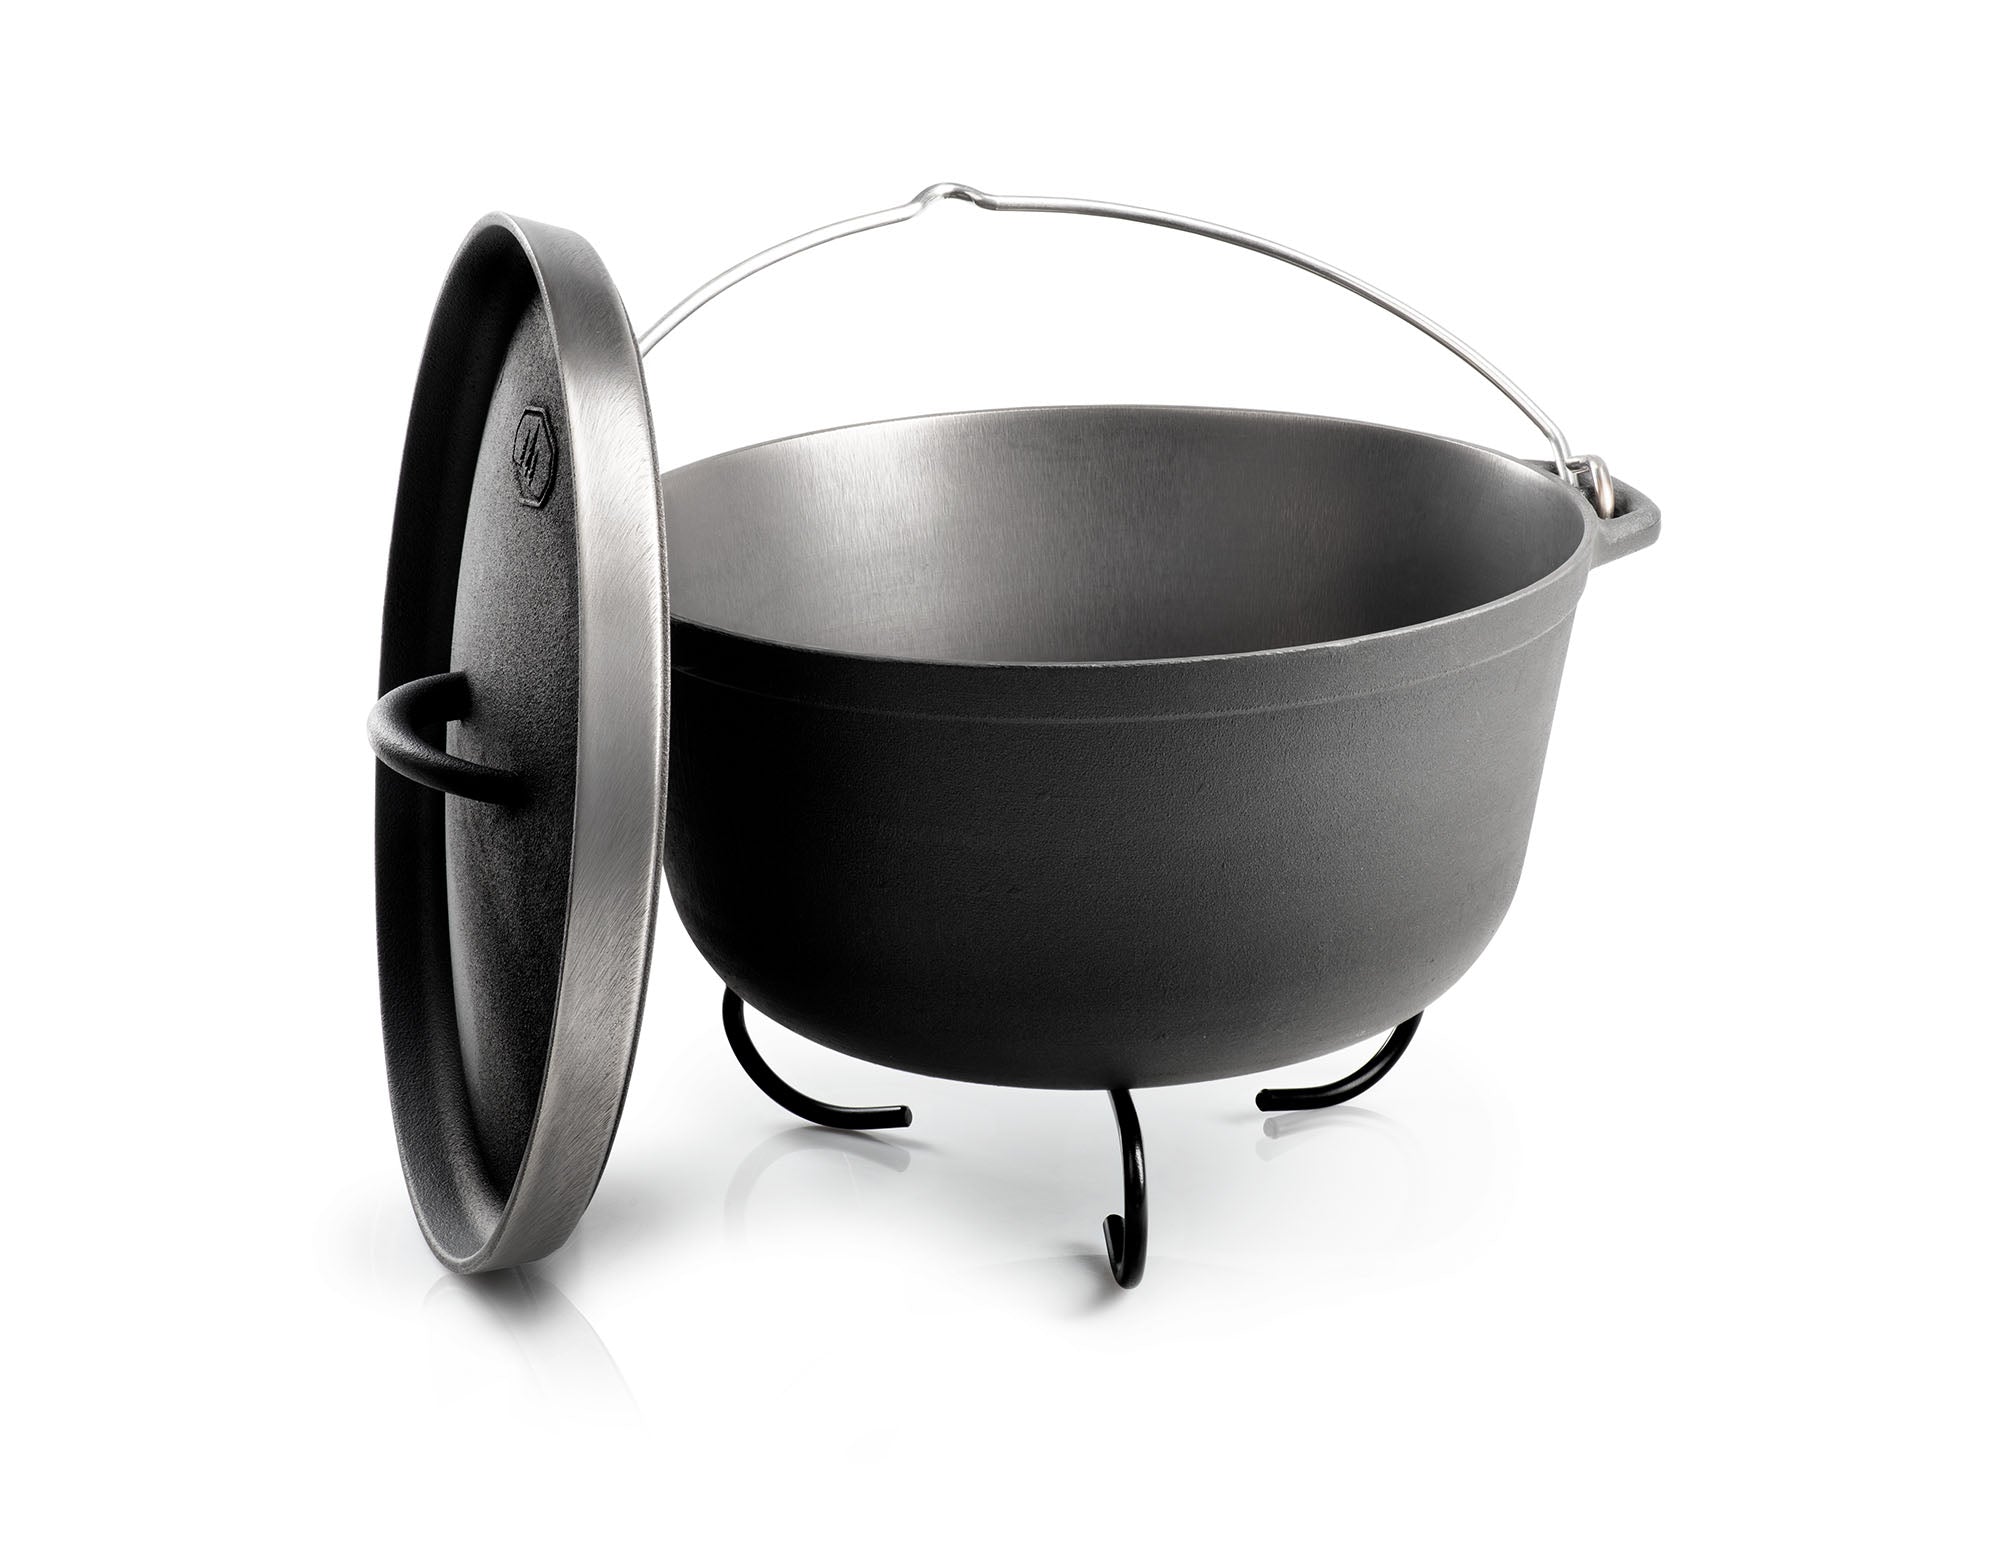 GSI Outdoors Hard Anodized Dutch Oven 10 in.